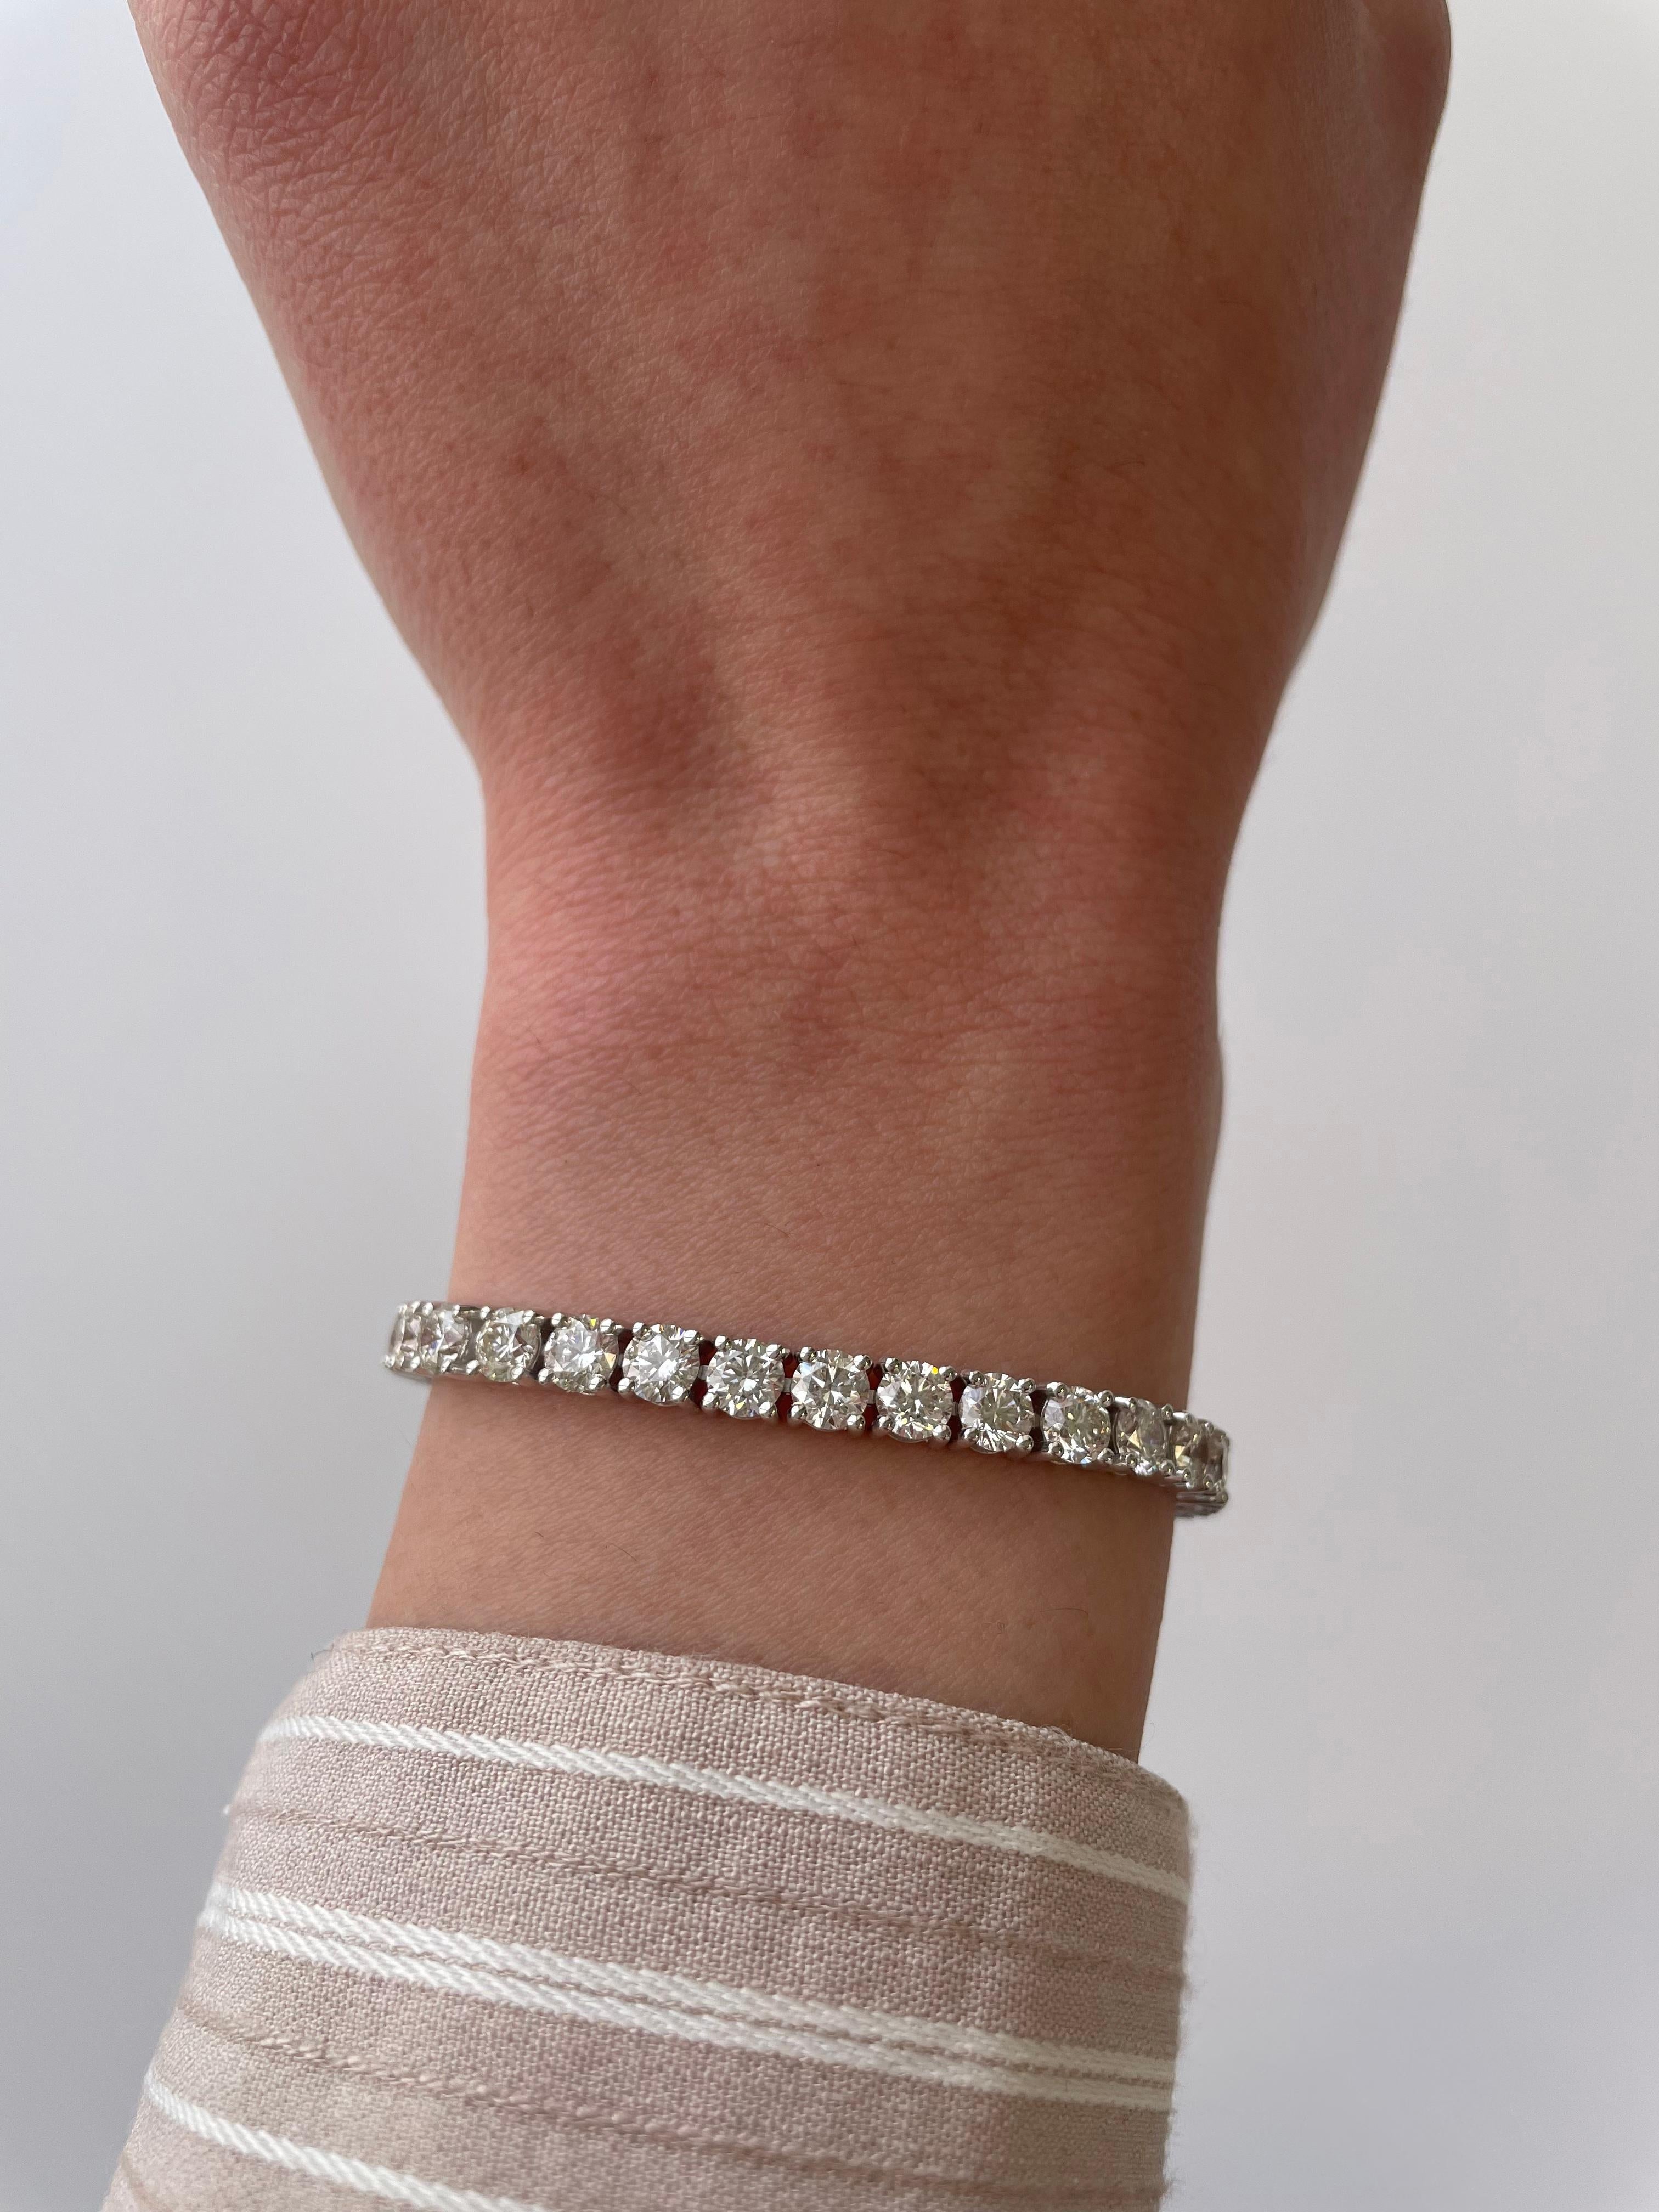 Exquisite and timeless diamonds tennis bracelet, by Alexander Beverly Hills.
38 round brilliant diamonds, 10.95 carats. Approximately F/G color and VS2/SI1 clarity. Four prong set in 18k white gold, 14.21 grams, 7 inches. 
Accommodated with an